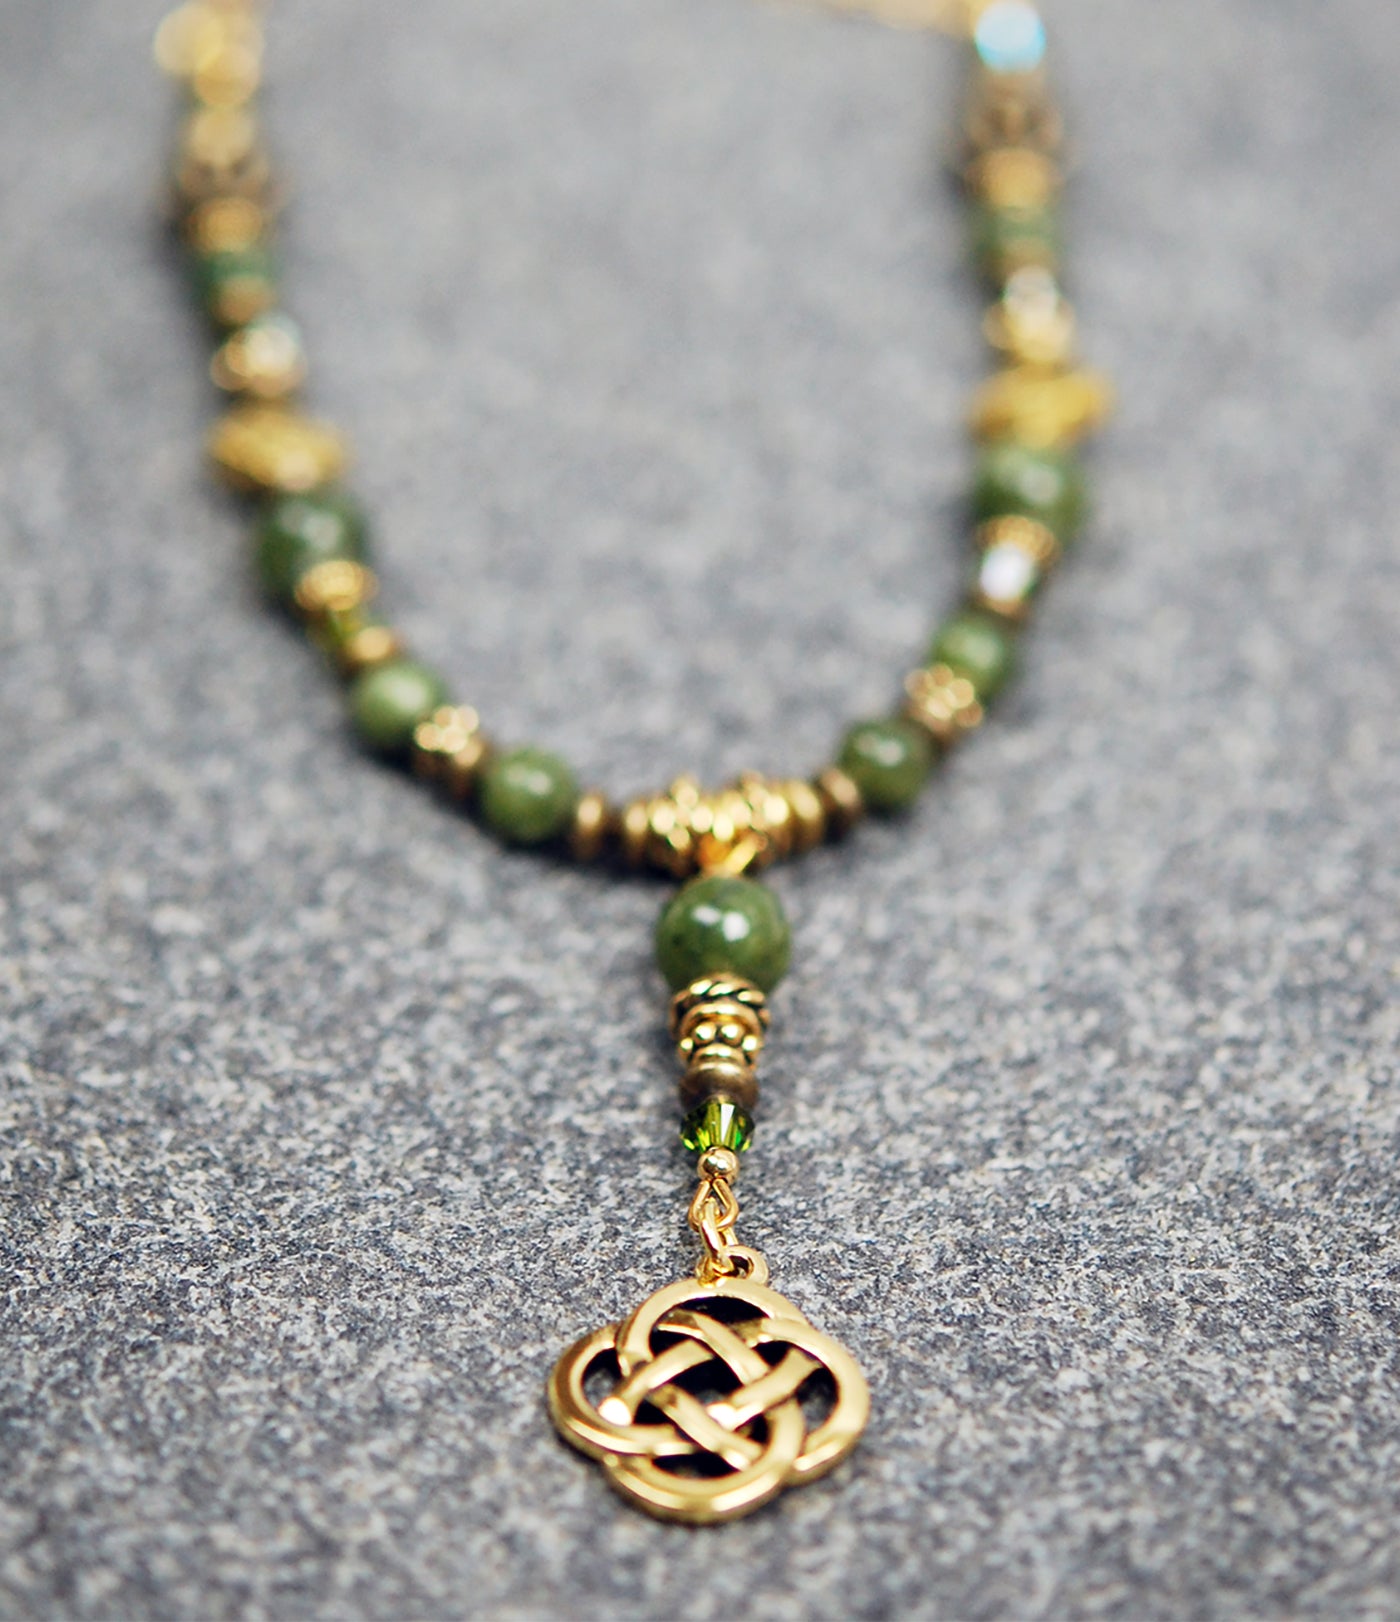 Diamond Celtic Knot and Connemara Marble Necklace